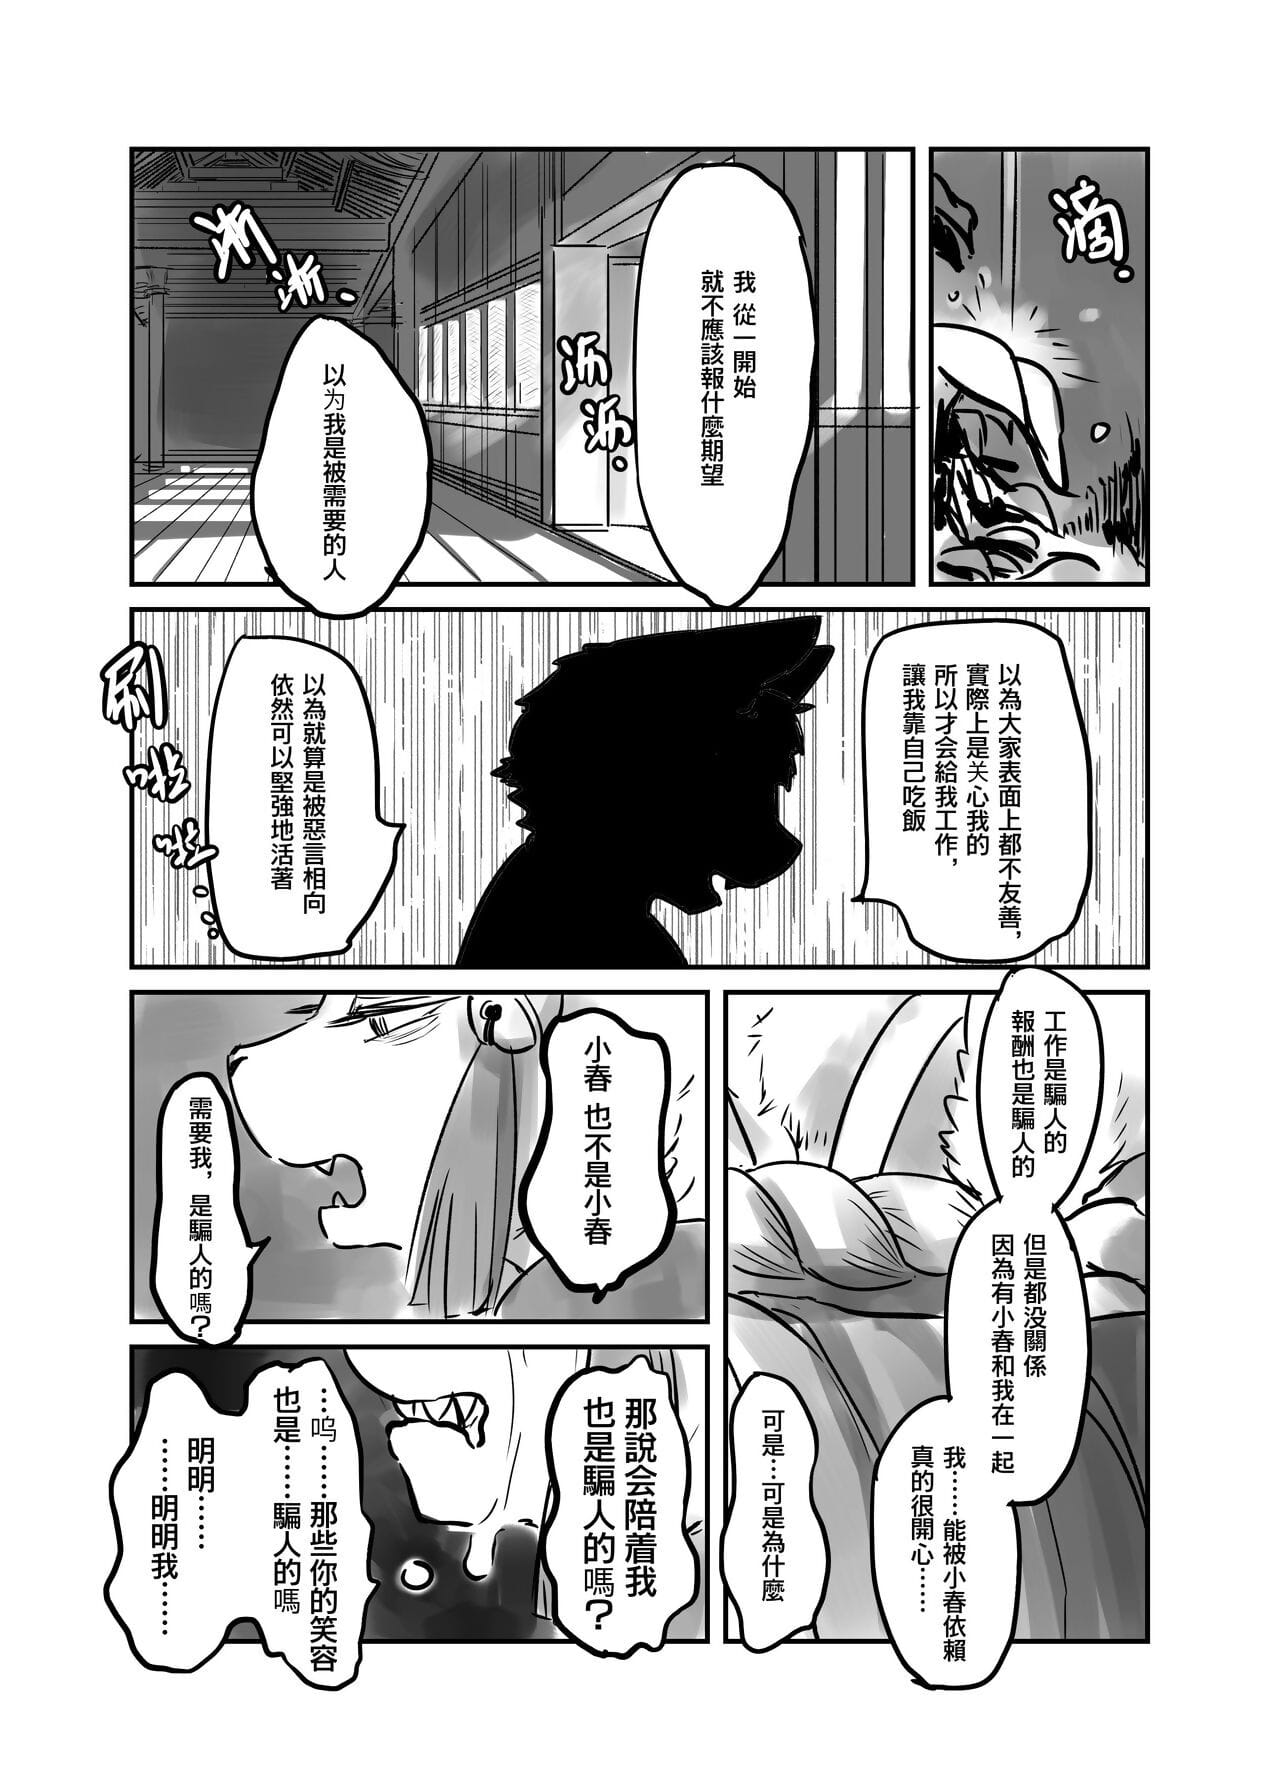 （The visitor 他乡之人 by：鬼流 - part 3 page 1